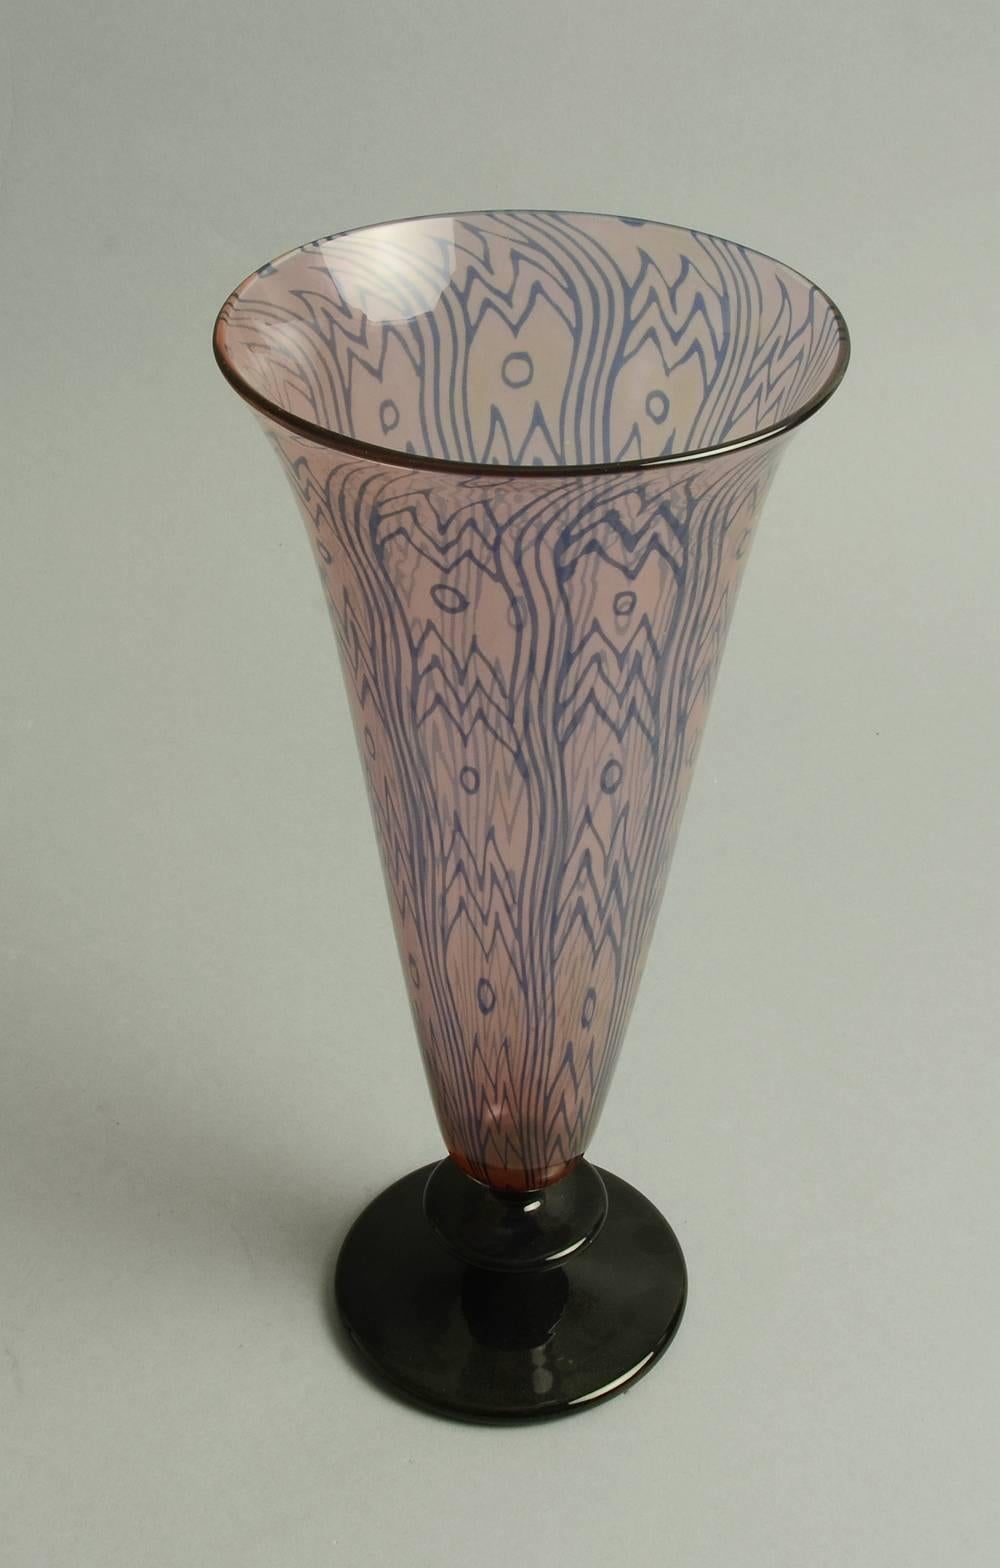 Edward Hald (with Knut Bergqvist) for Orrefors.
Early slip graal chalice form vase in pink and blue glass, 1928.
Engraved 